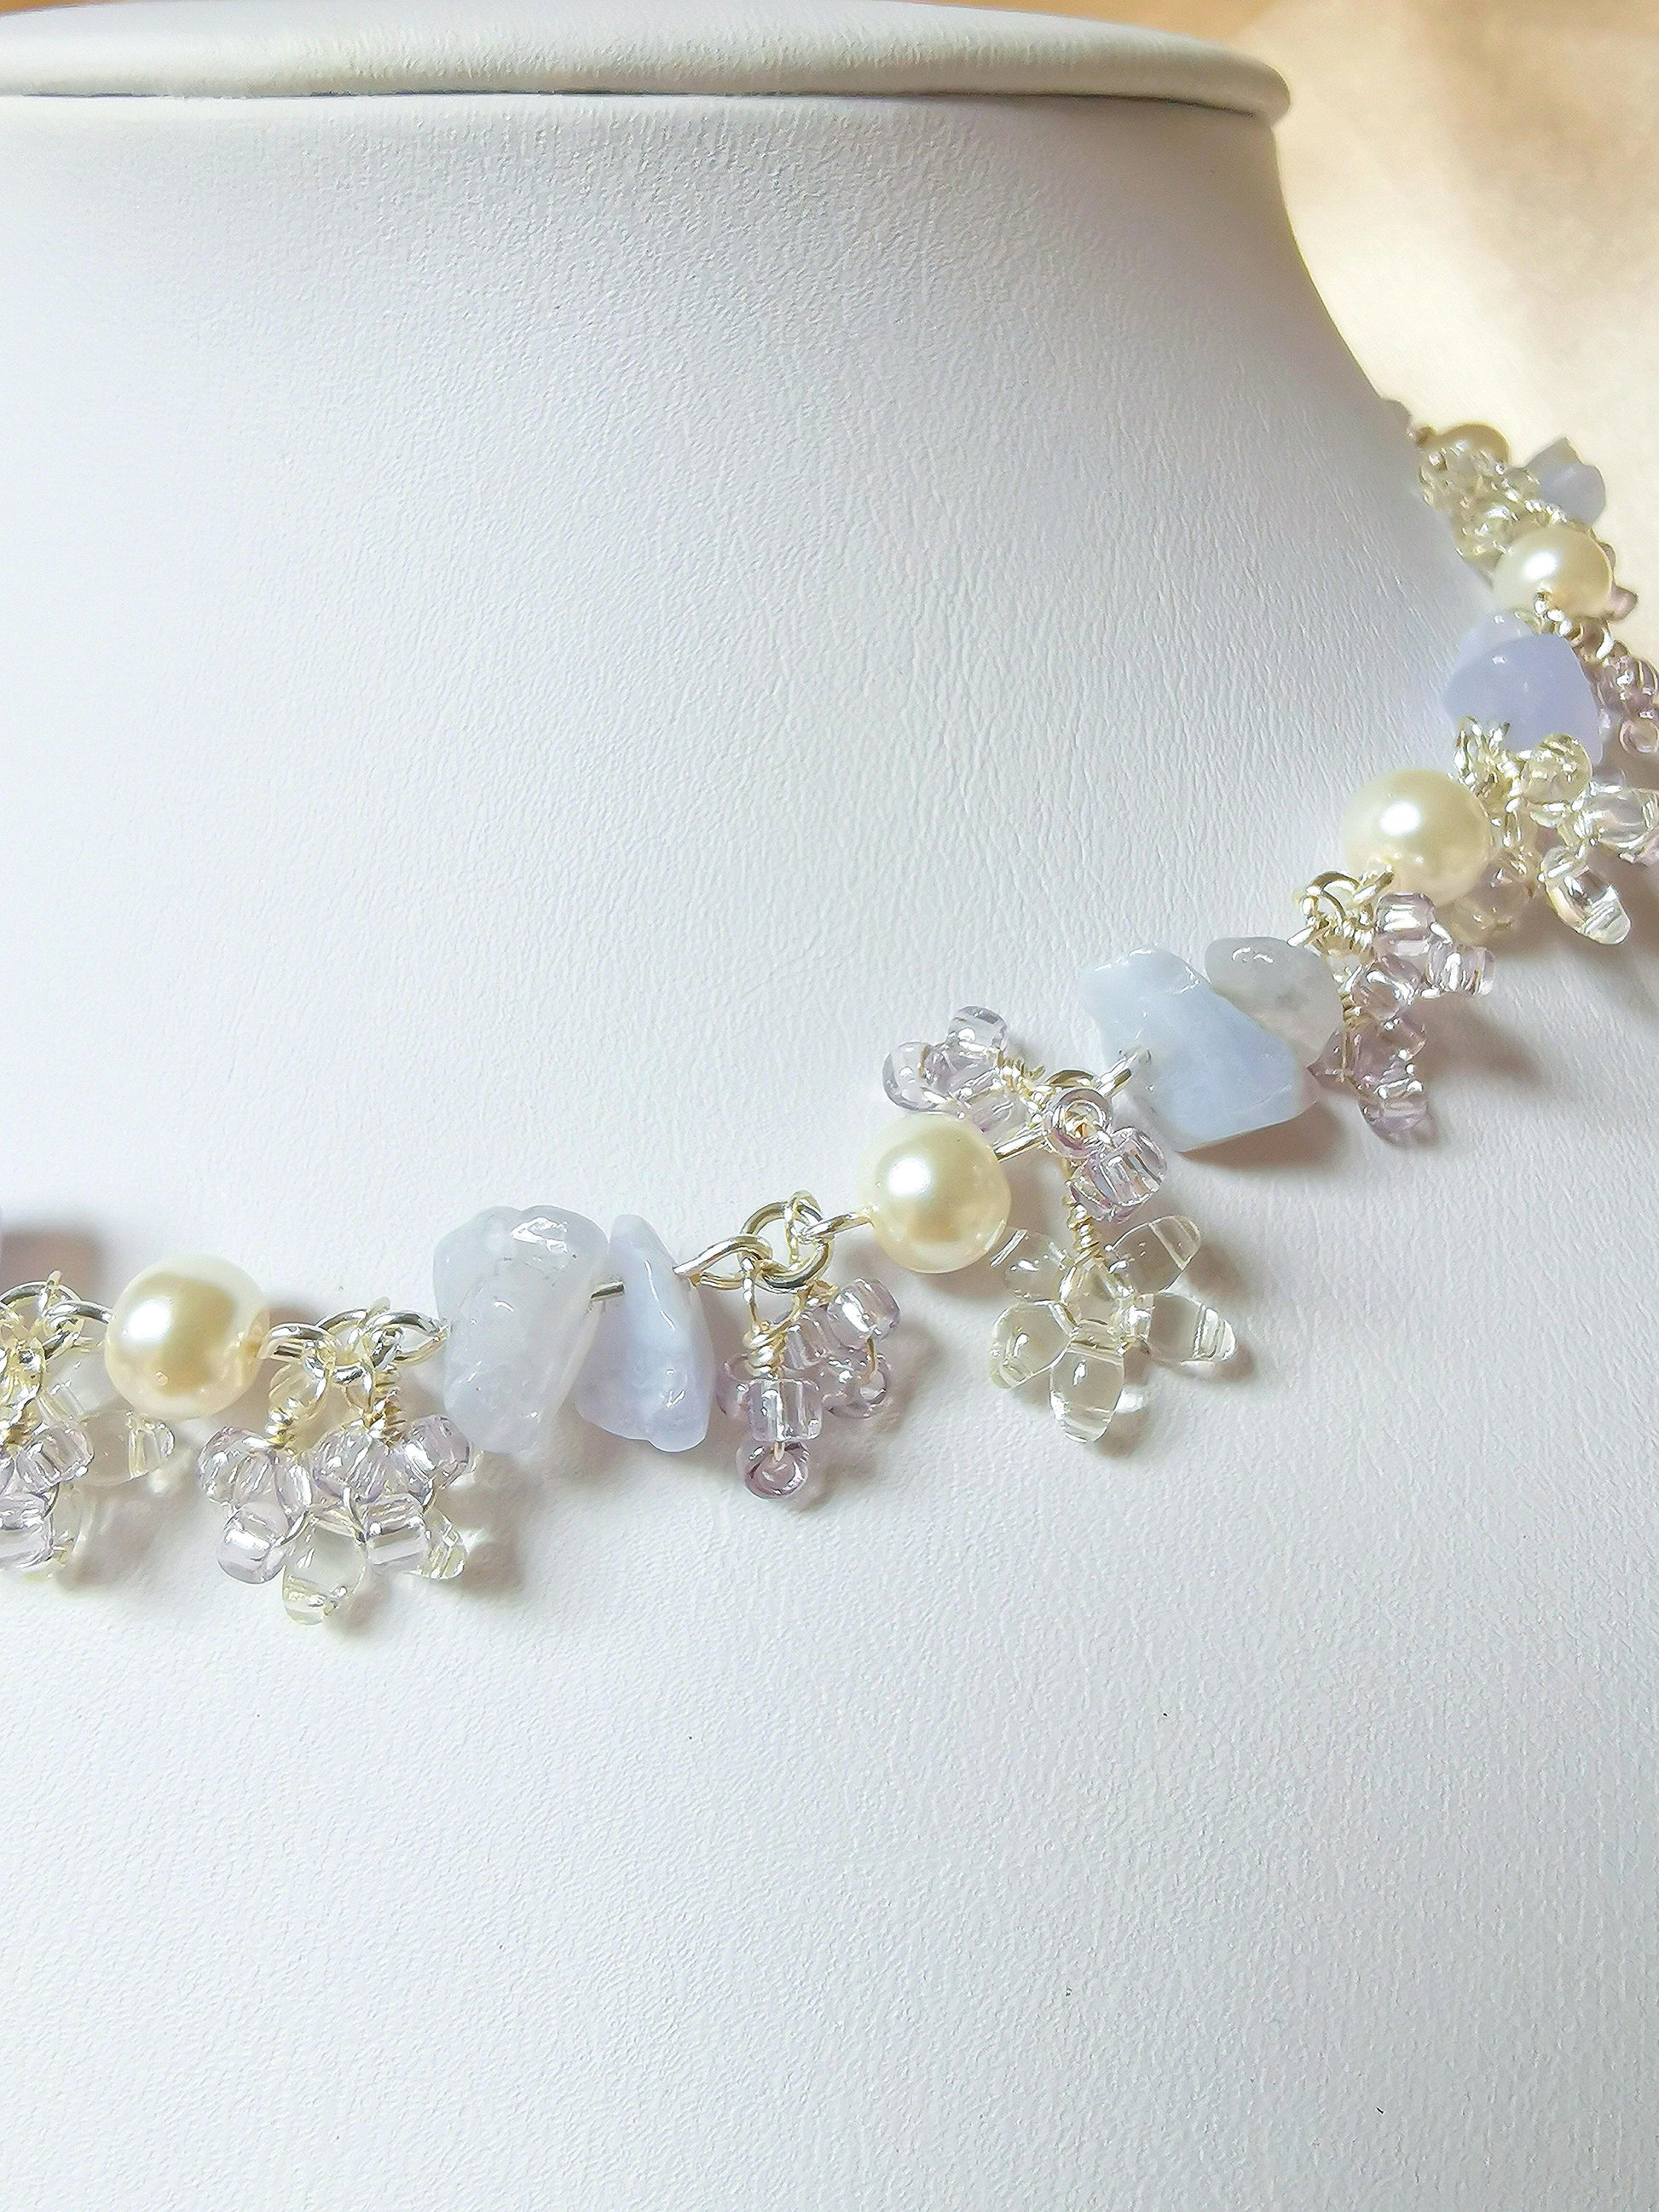 Silver Lace Choker - By Cocoyu